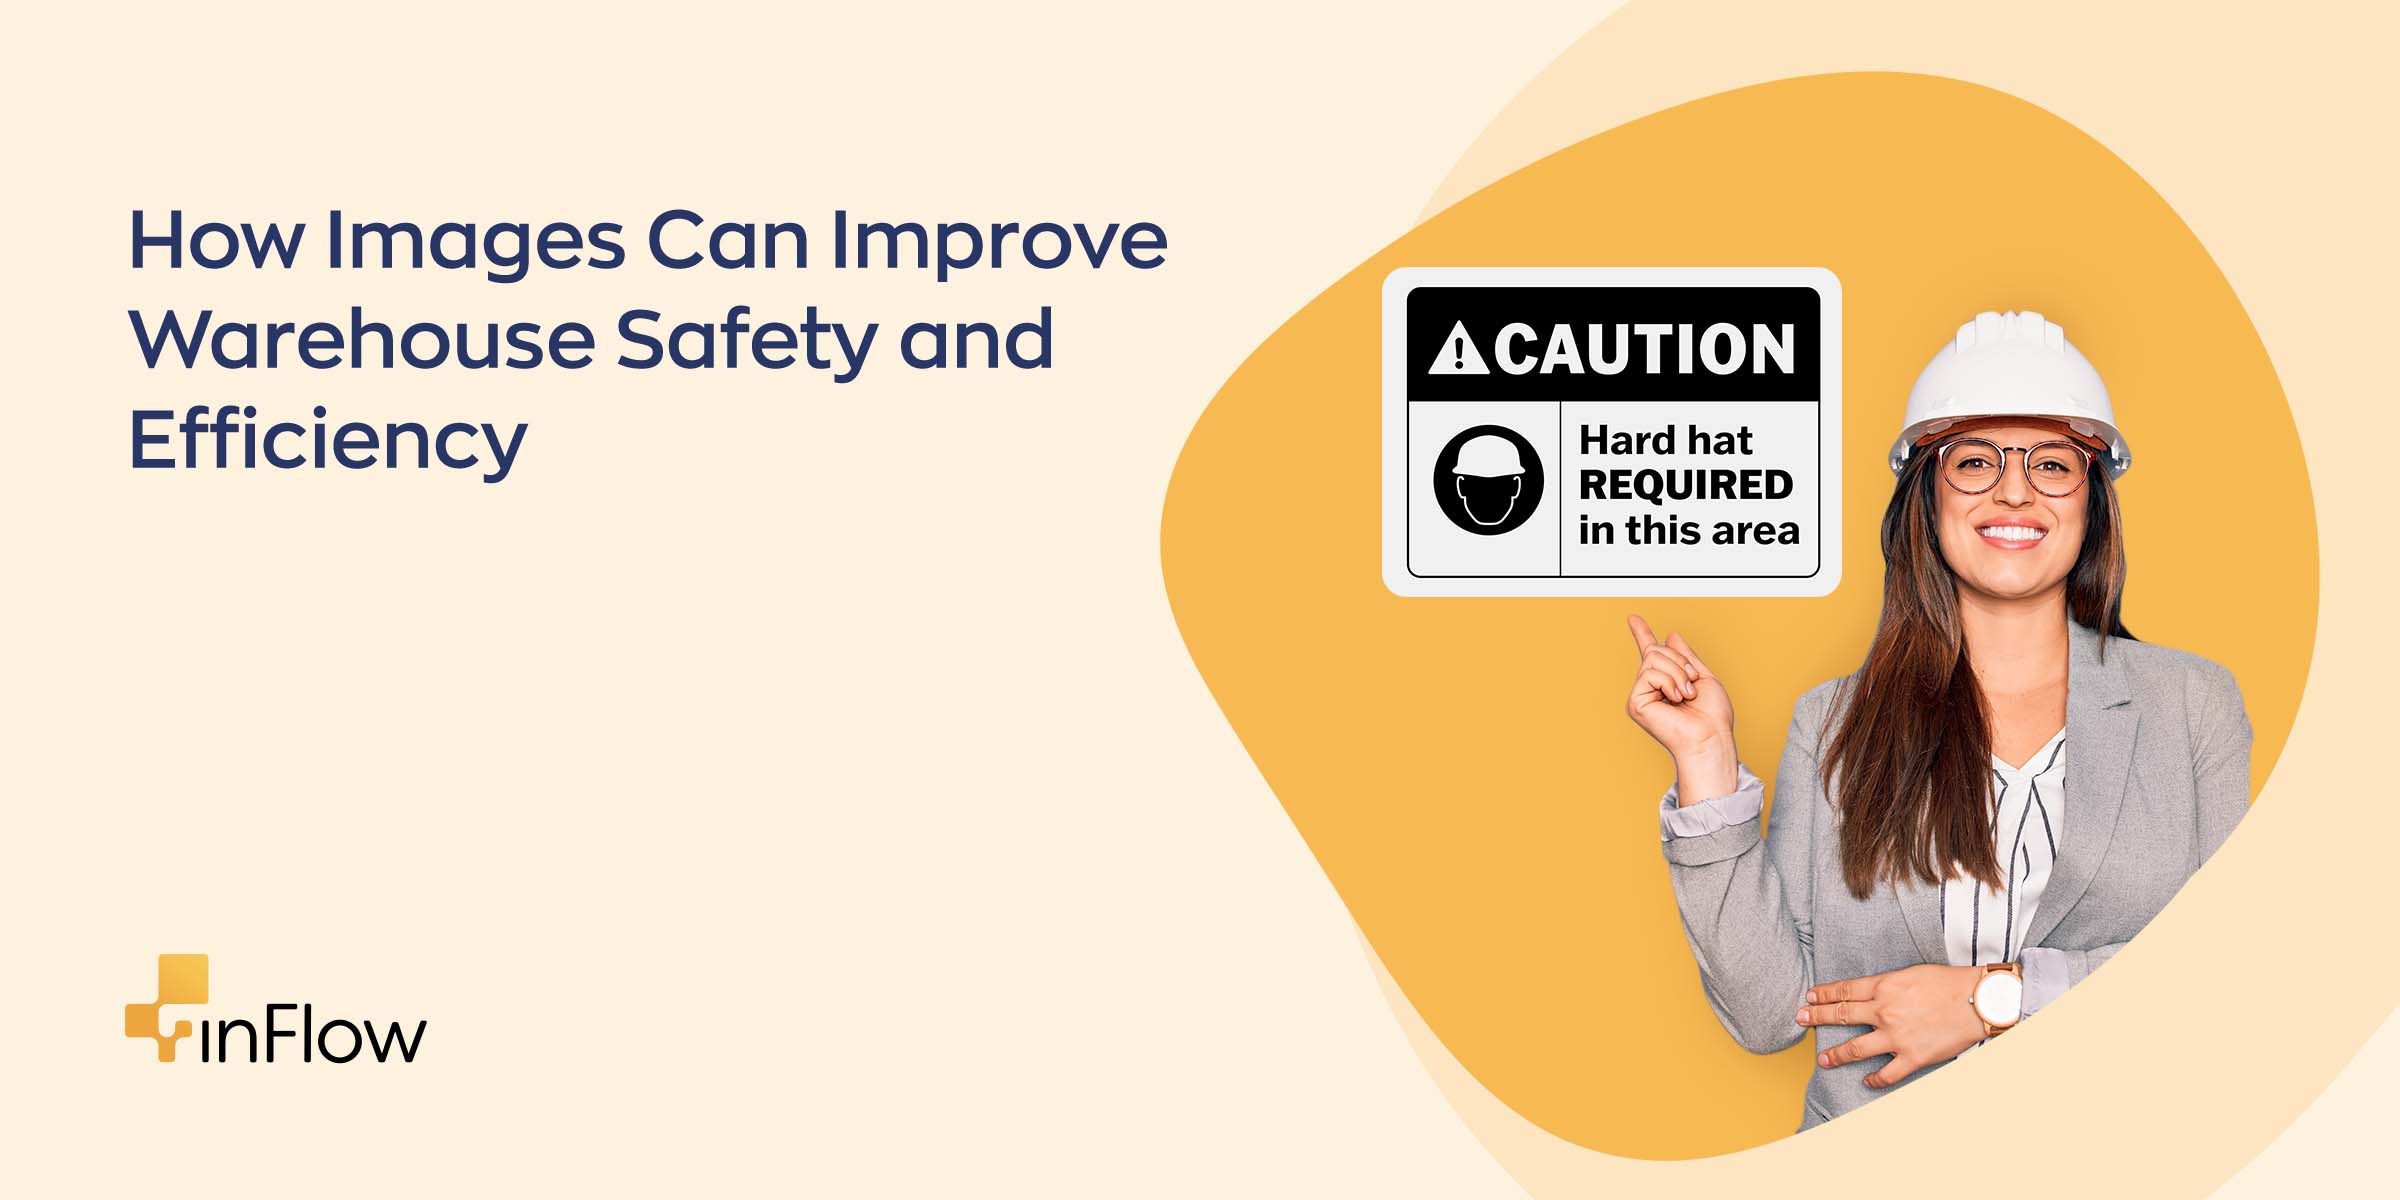 How Images Can Improve Warehouse Safety and Efficiency